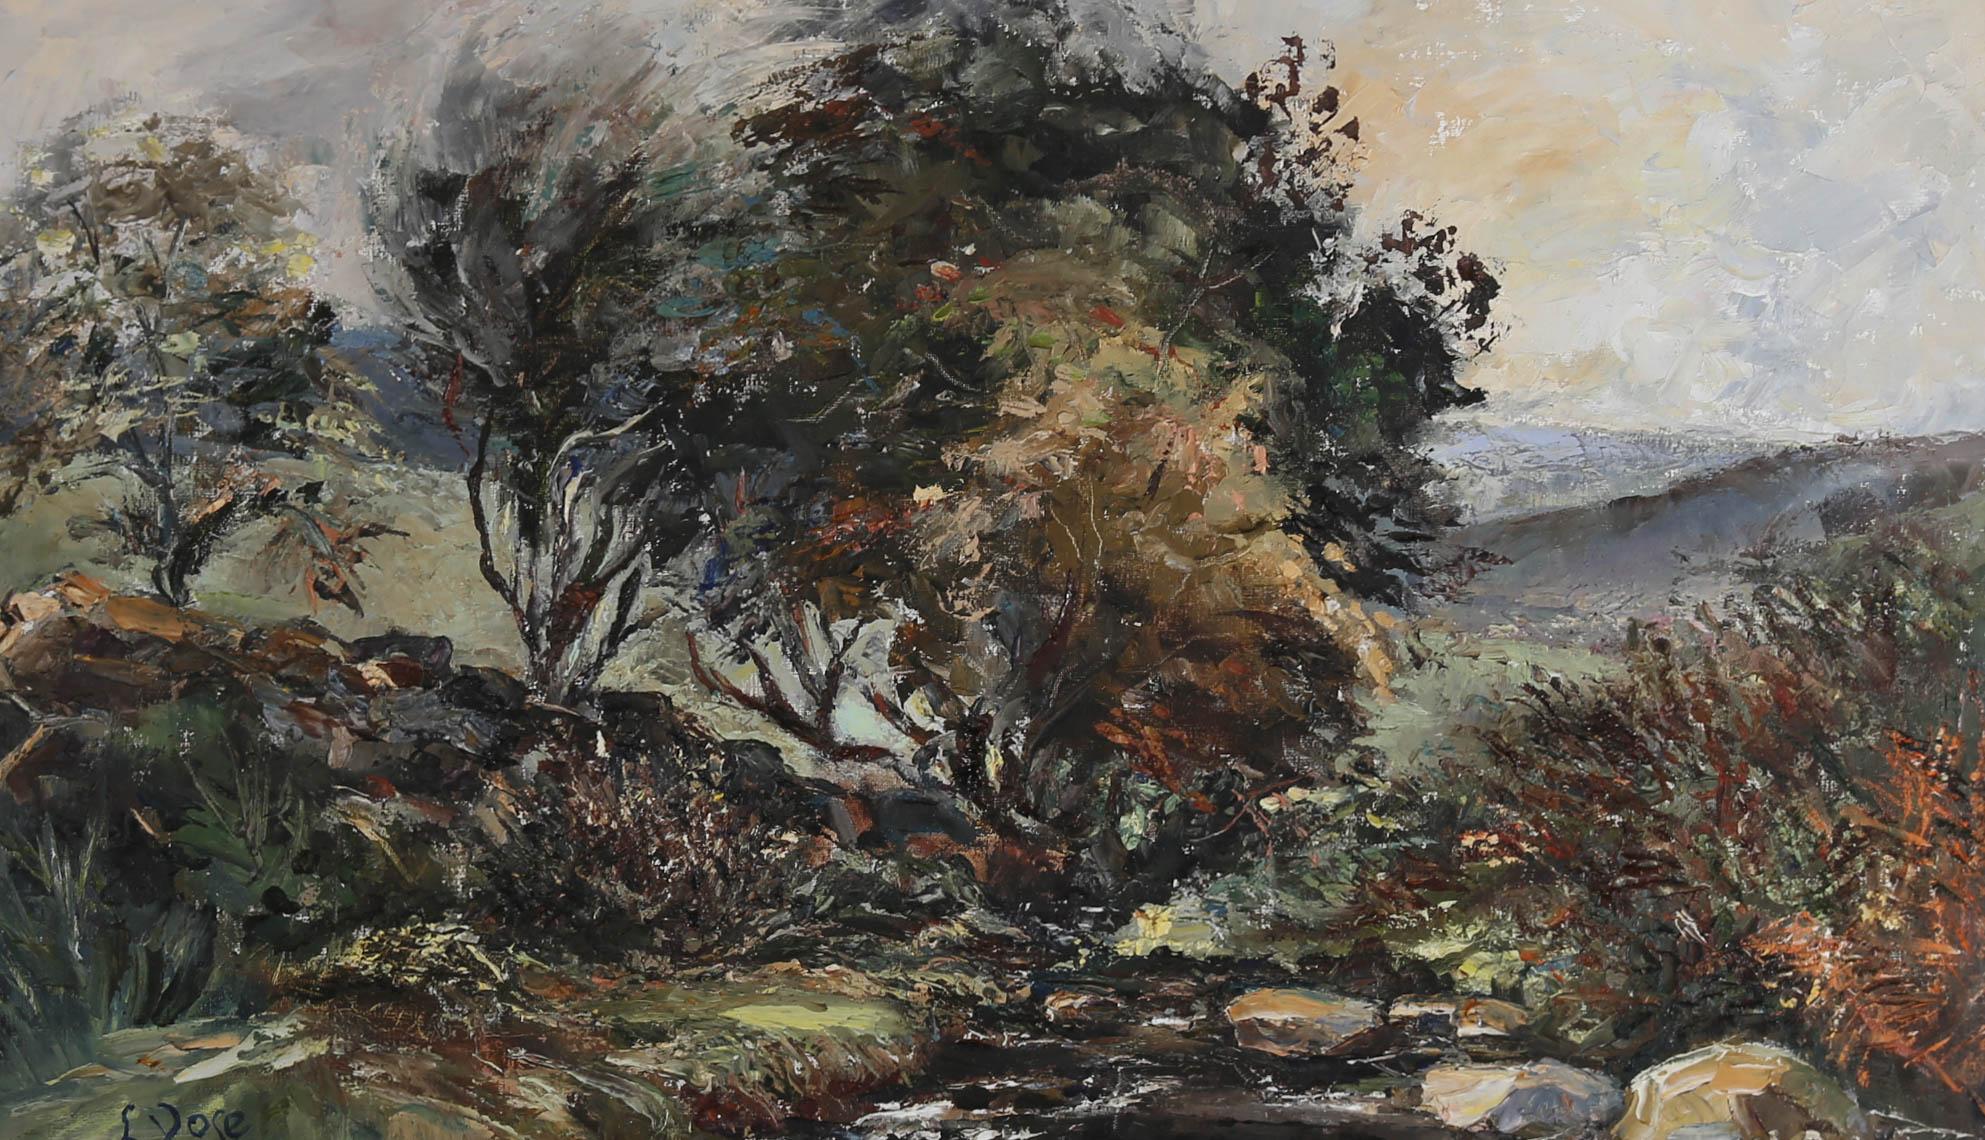 This wonderful impressionist oil depicts a scene from the moorlands of Exmoor with windswept trees and rugged hills. The impasto details created by the artist suggests the weather is about to change with a storm on its way. The painting has been